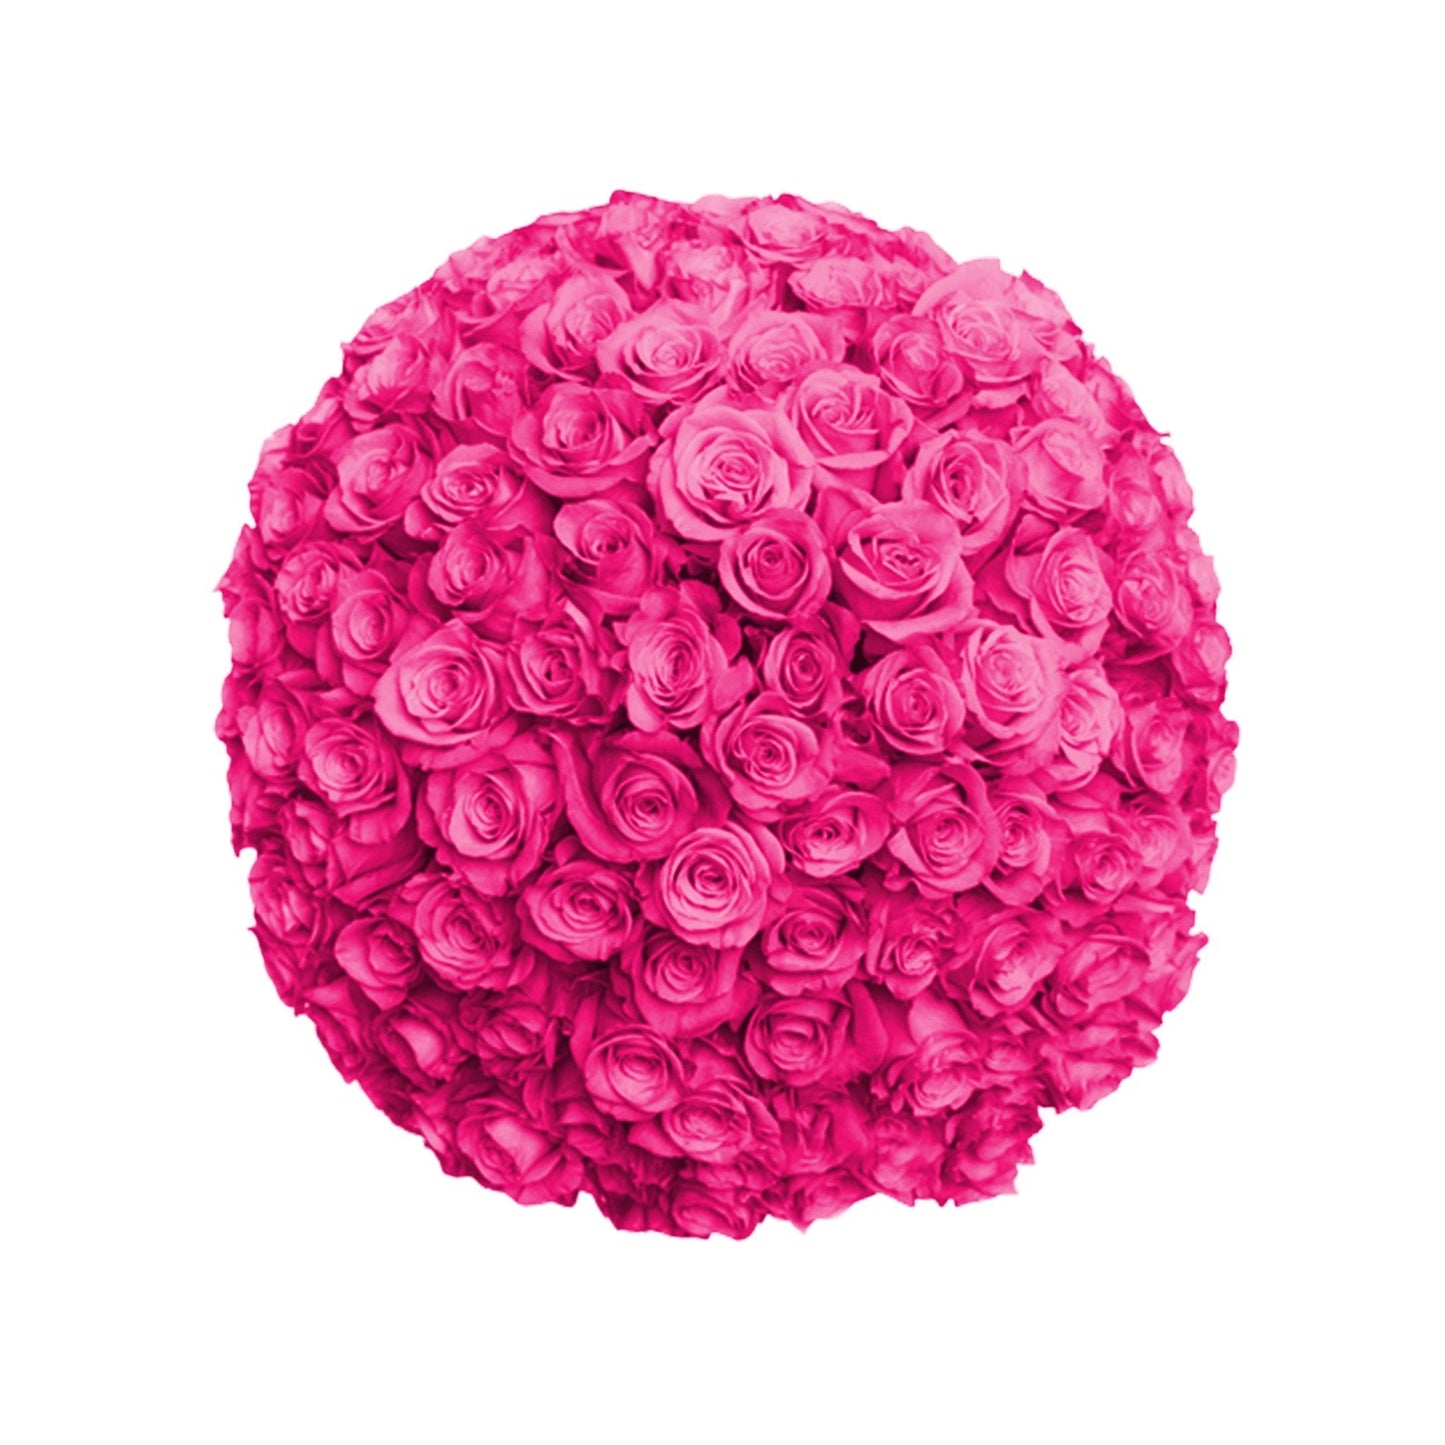 Fresh Roses in a Vase | 100 Hot Pink Roses - Fresh Cut Flowers - Queens Flower Delivery